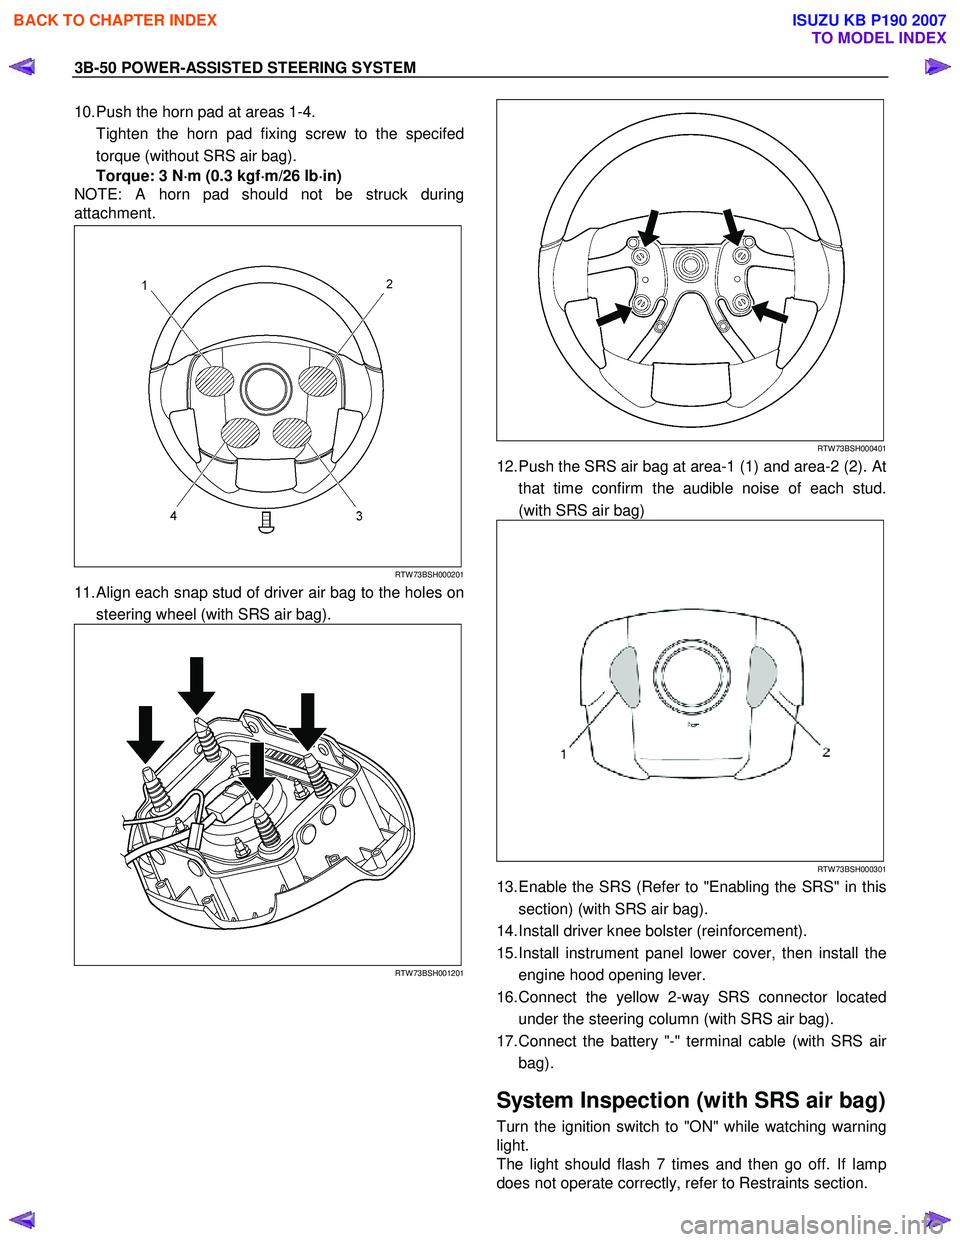 ISUZU KB P190 2007  Workshop Repair Manual 3B-50 POWER-ASSISTED STEERING SYSTEM 
10. Push the horn pad at areas 1-4.  
  Tighten the horn pad fixing screw to the specifed torque (without SRS air bag).  
Torque: 3 N ⋅
⋅⋅ 
⋅
m (0.3 kgf �